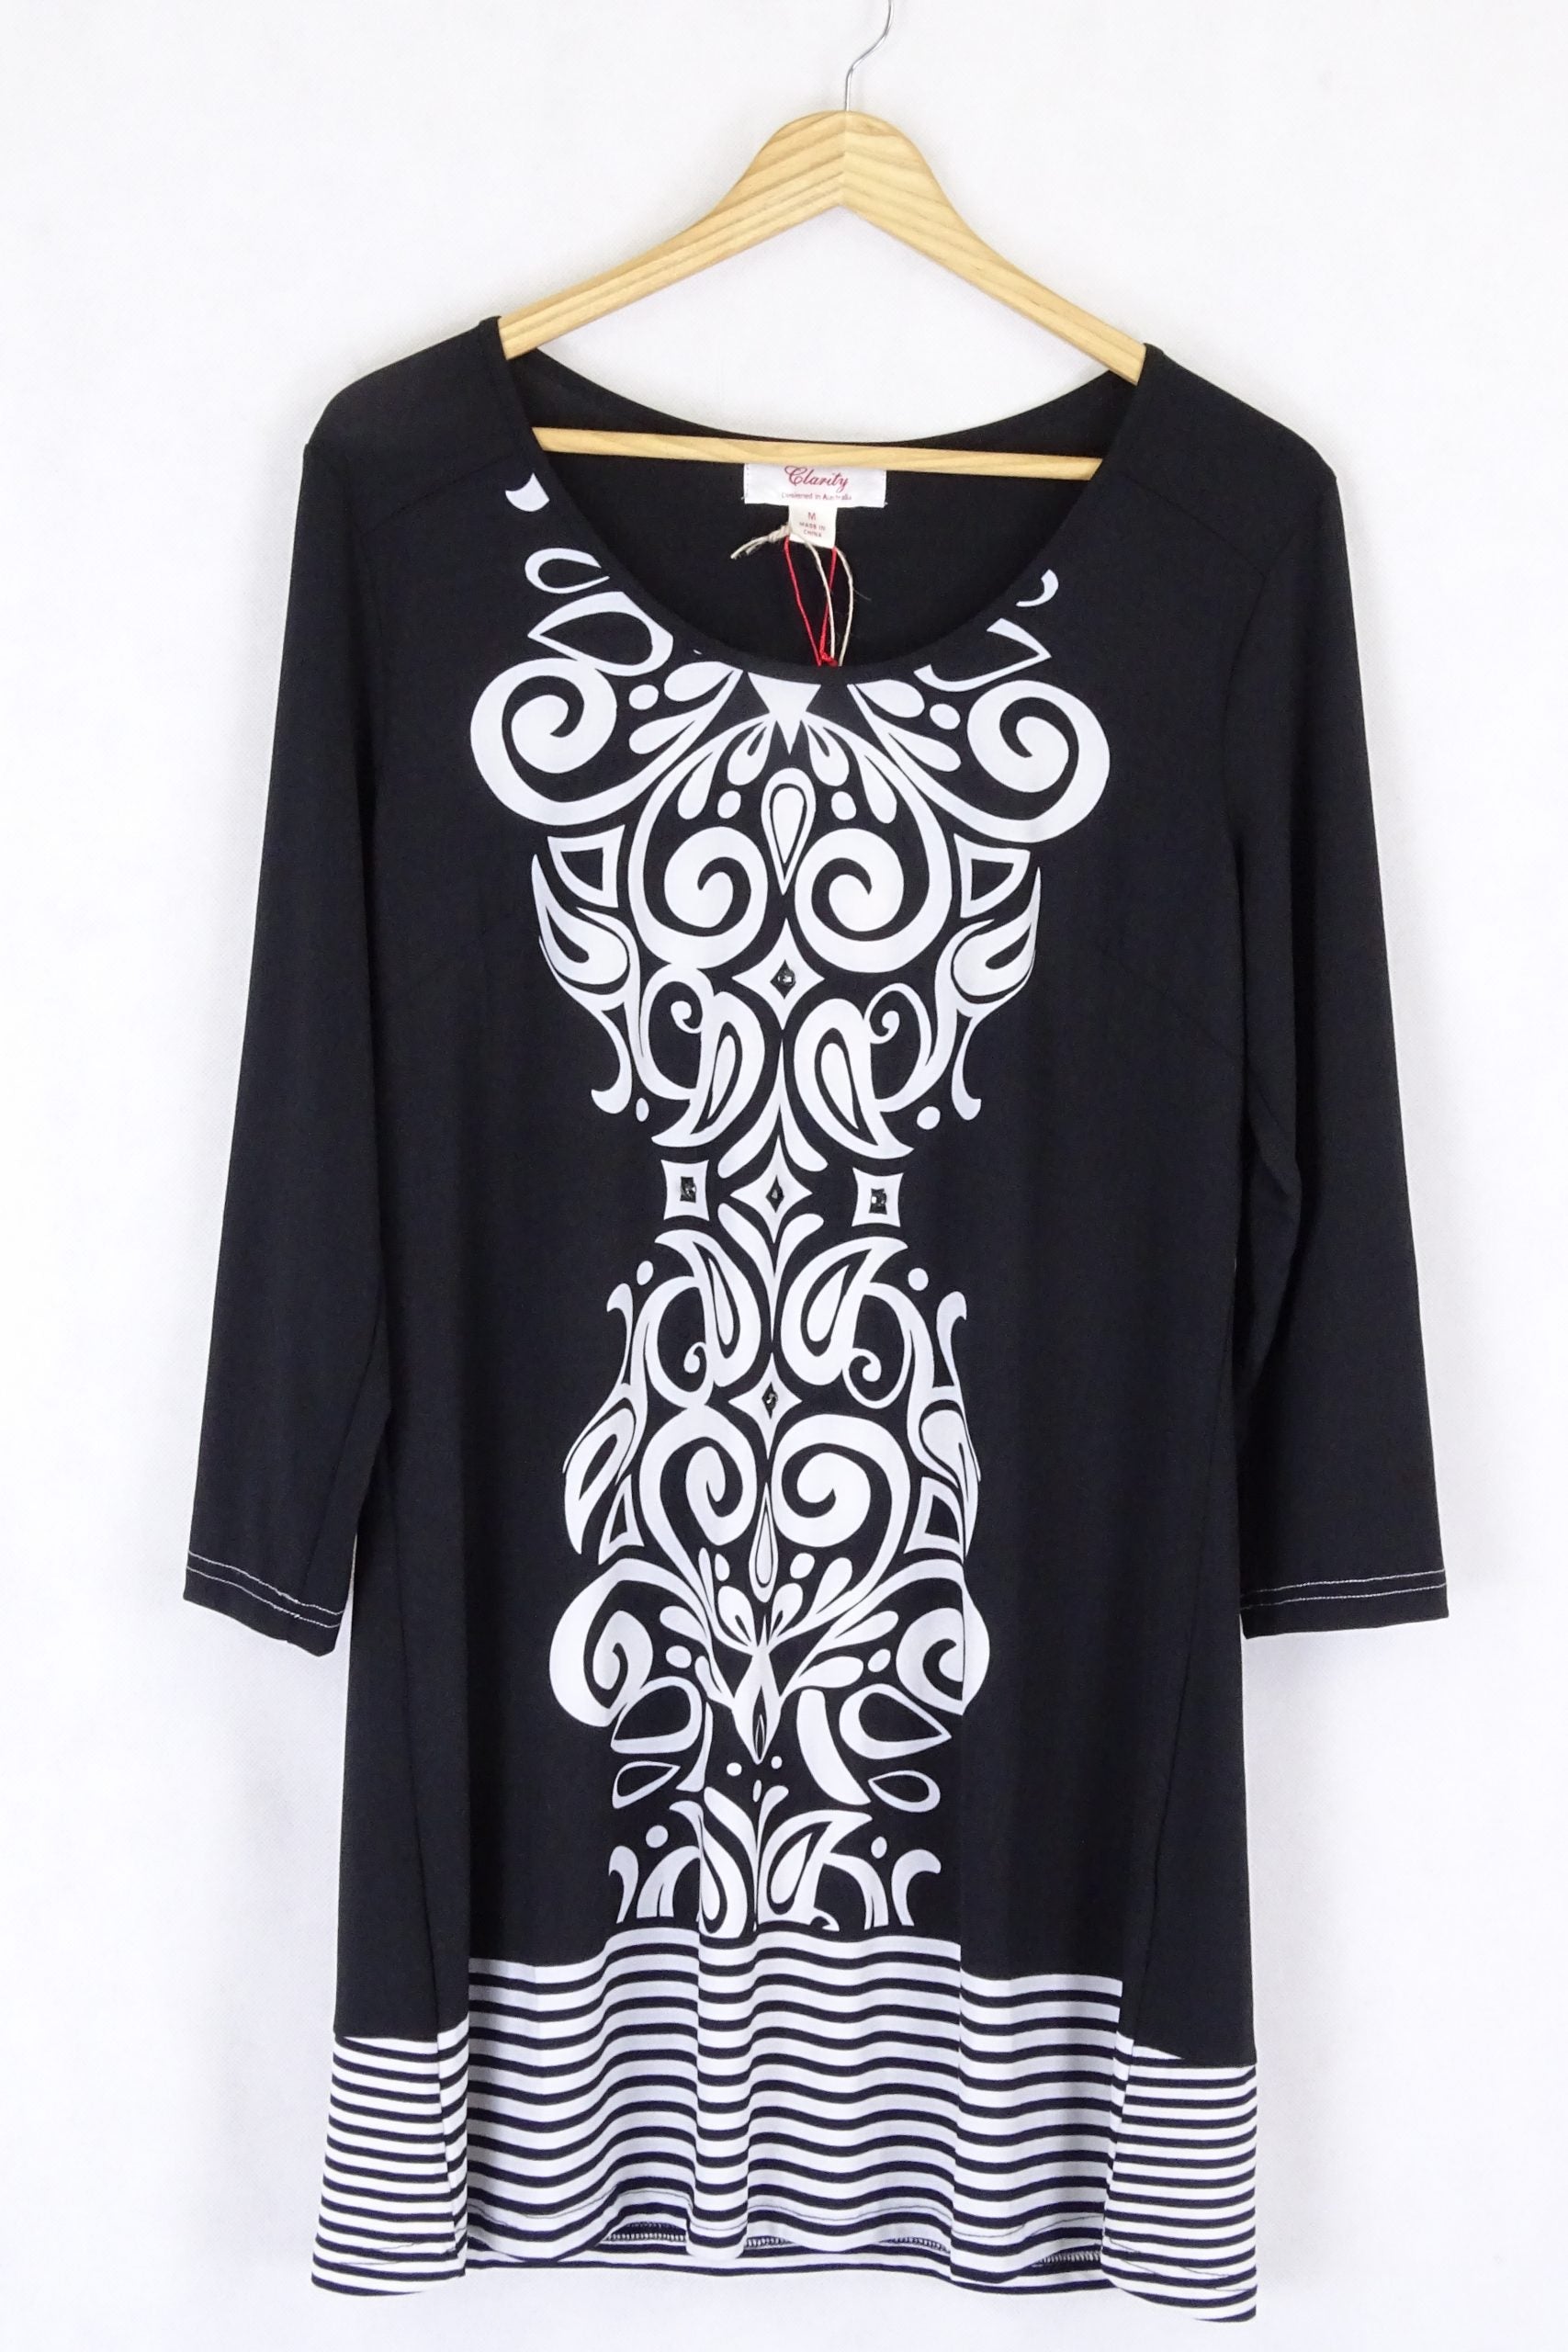 Clarity Top Black White Size M